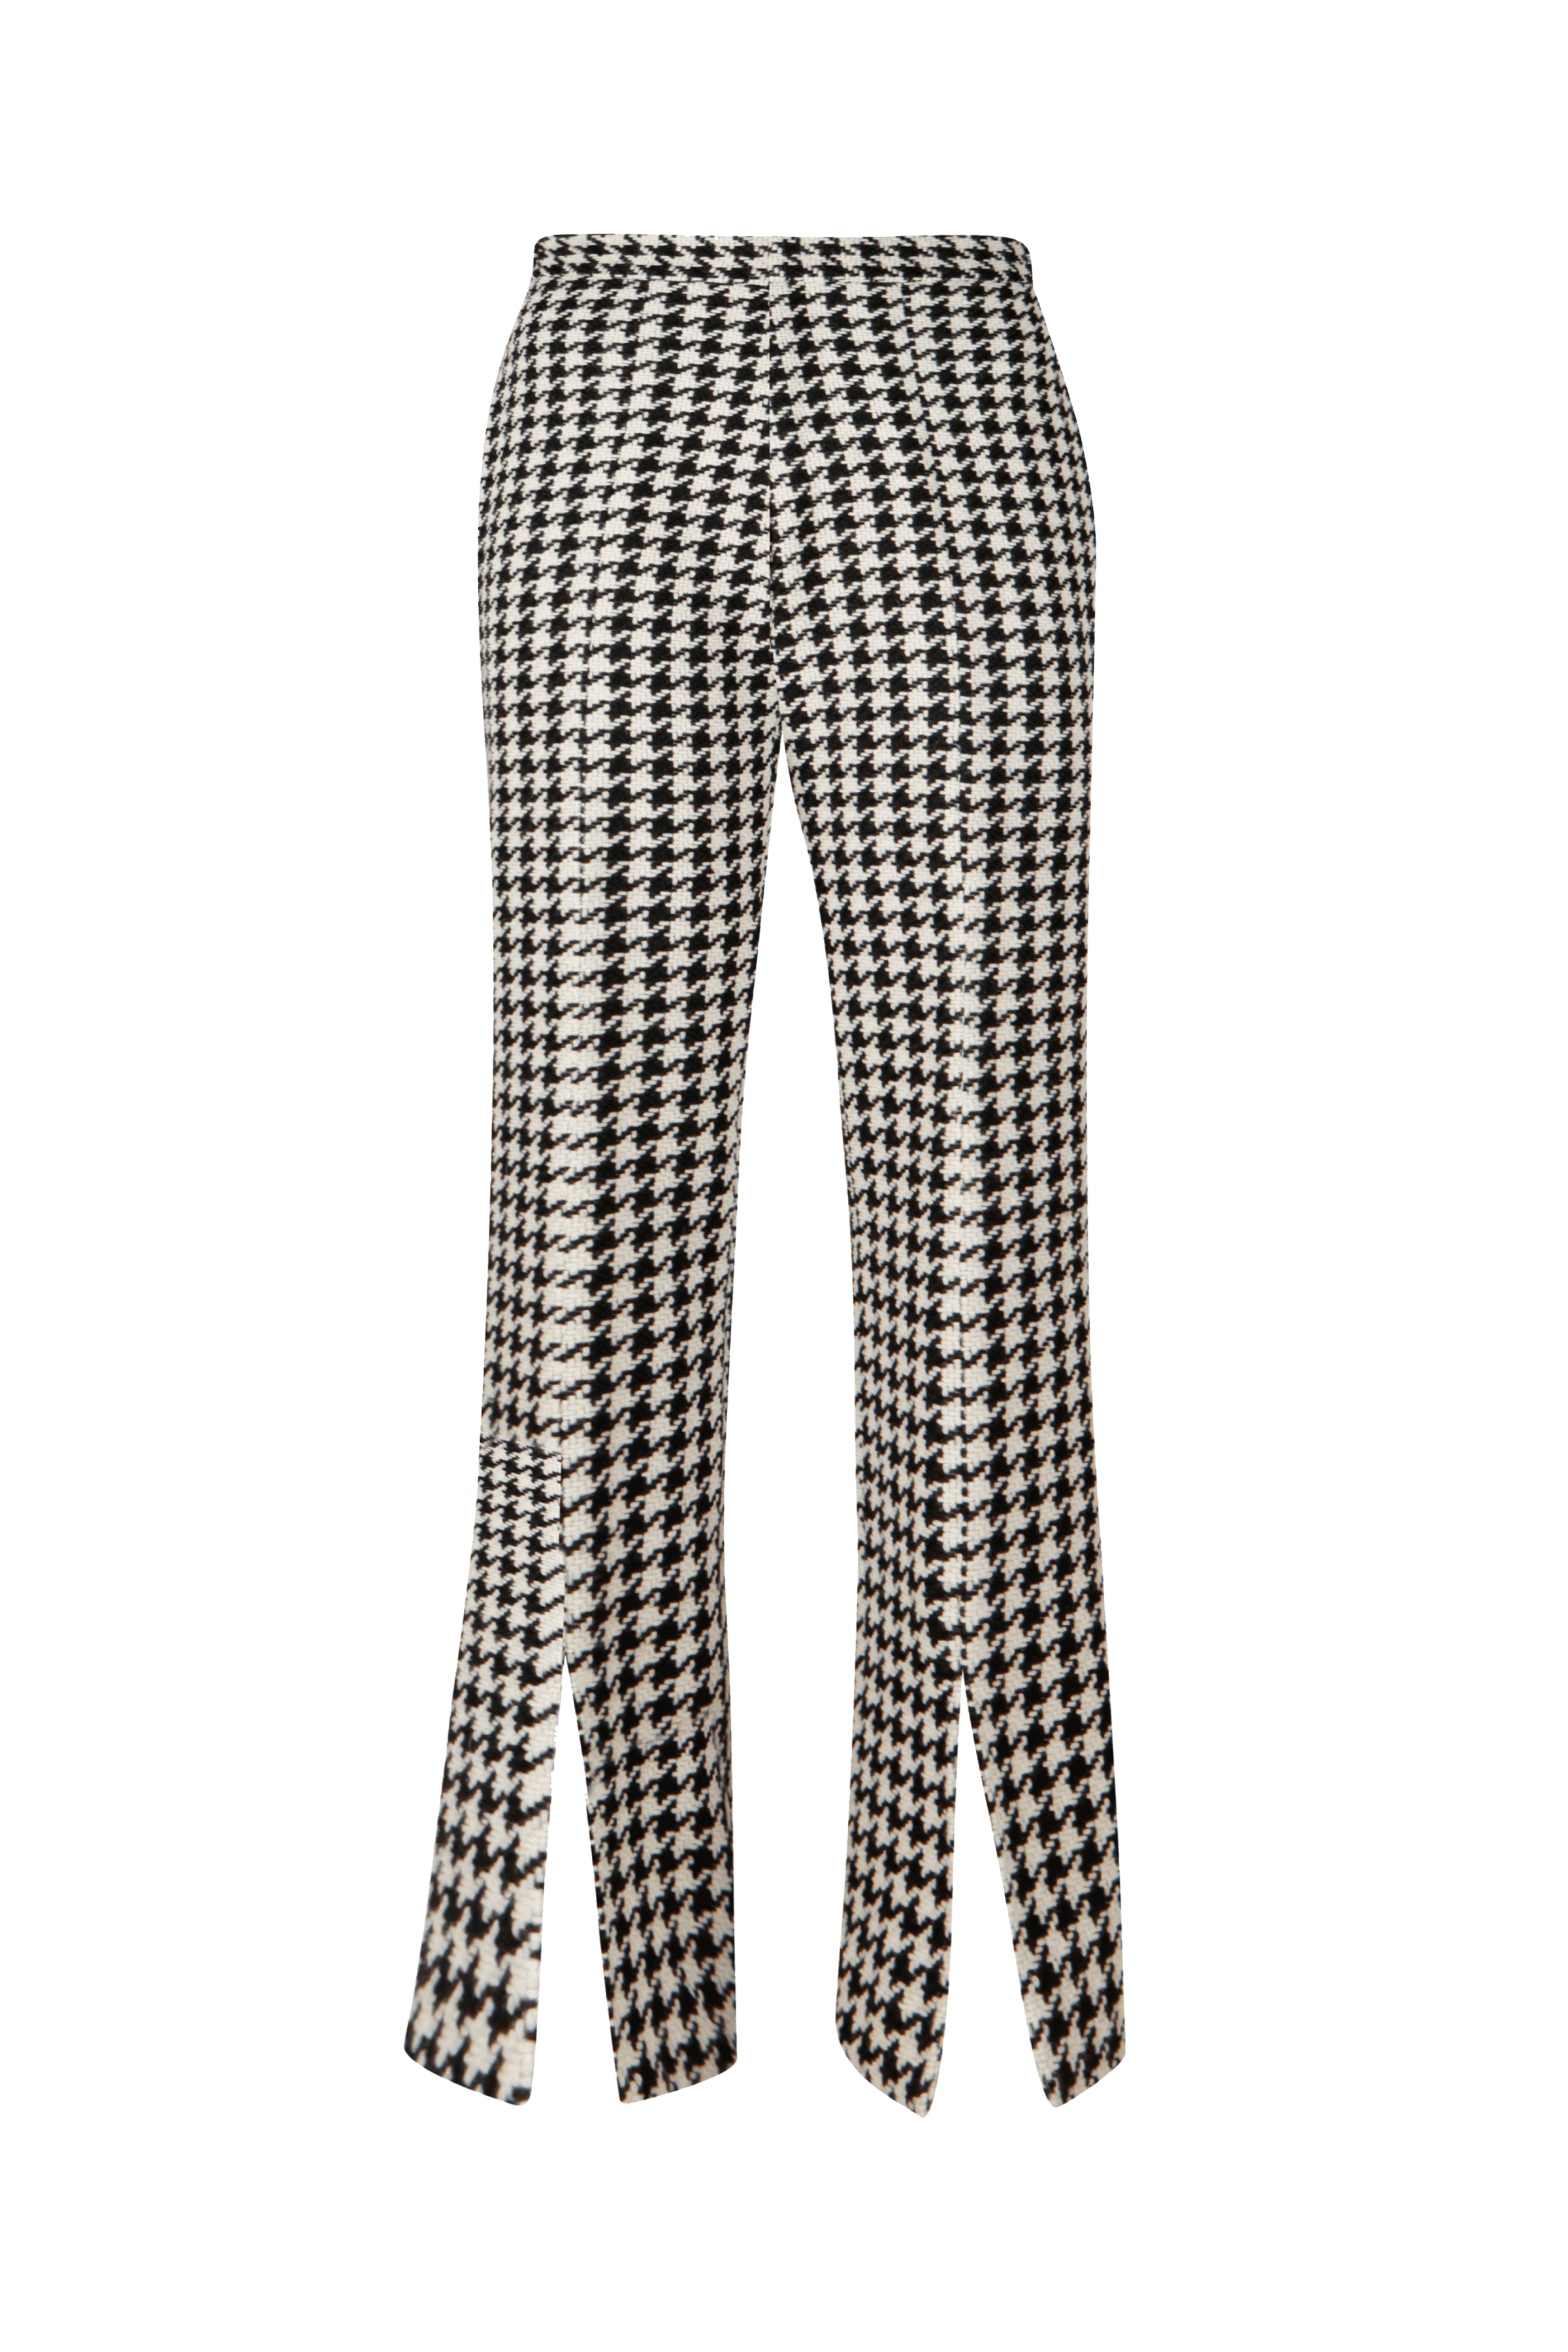 Ariston Black & White Houndstooth Slit Front Pant by Knot Standard